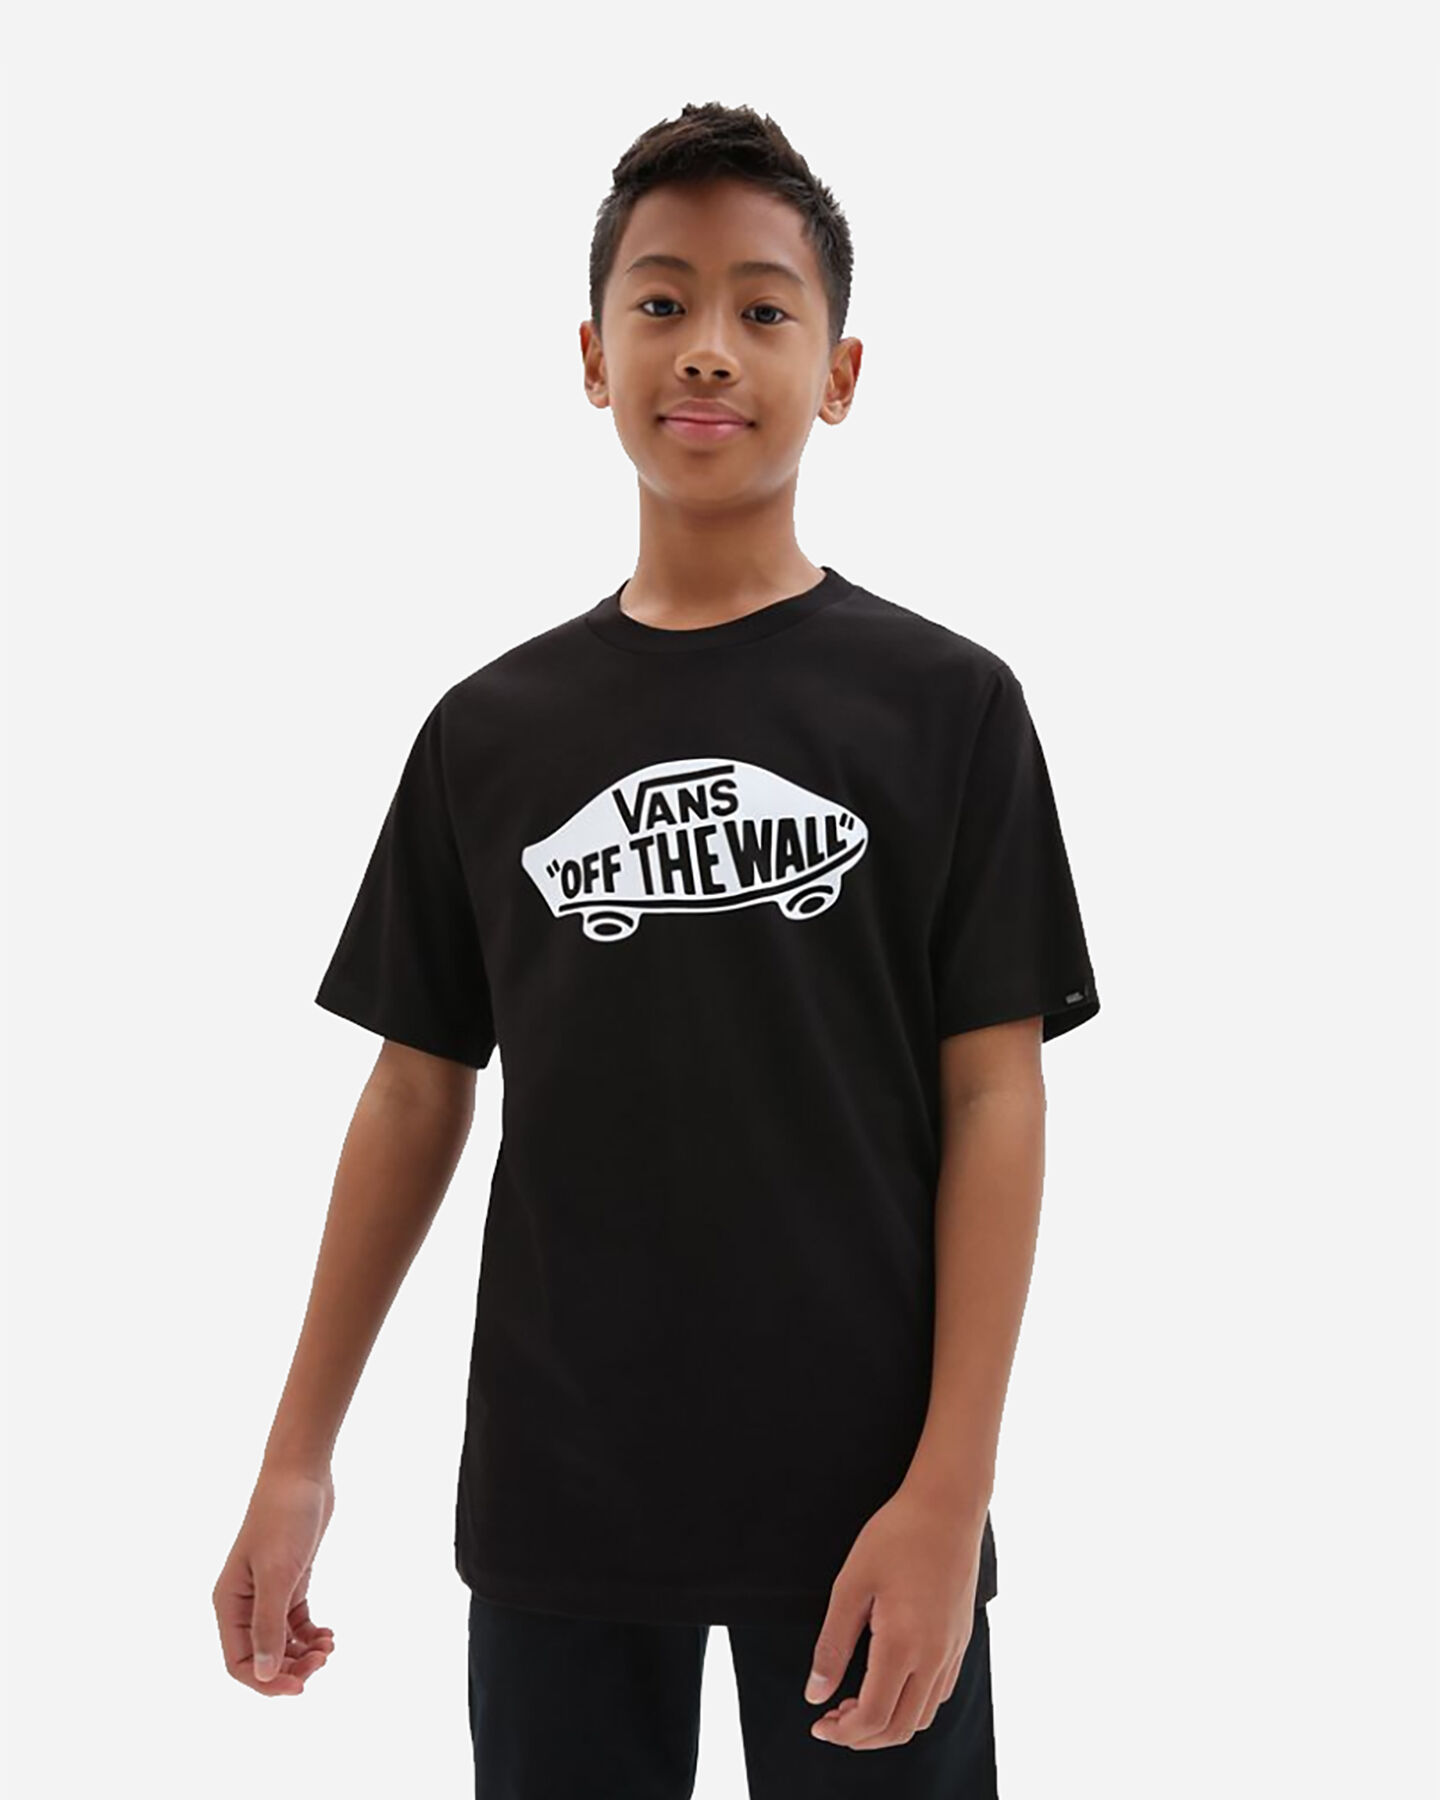  T-Shirt VANS OFF THE WALL JR S4048052 scatto 0